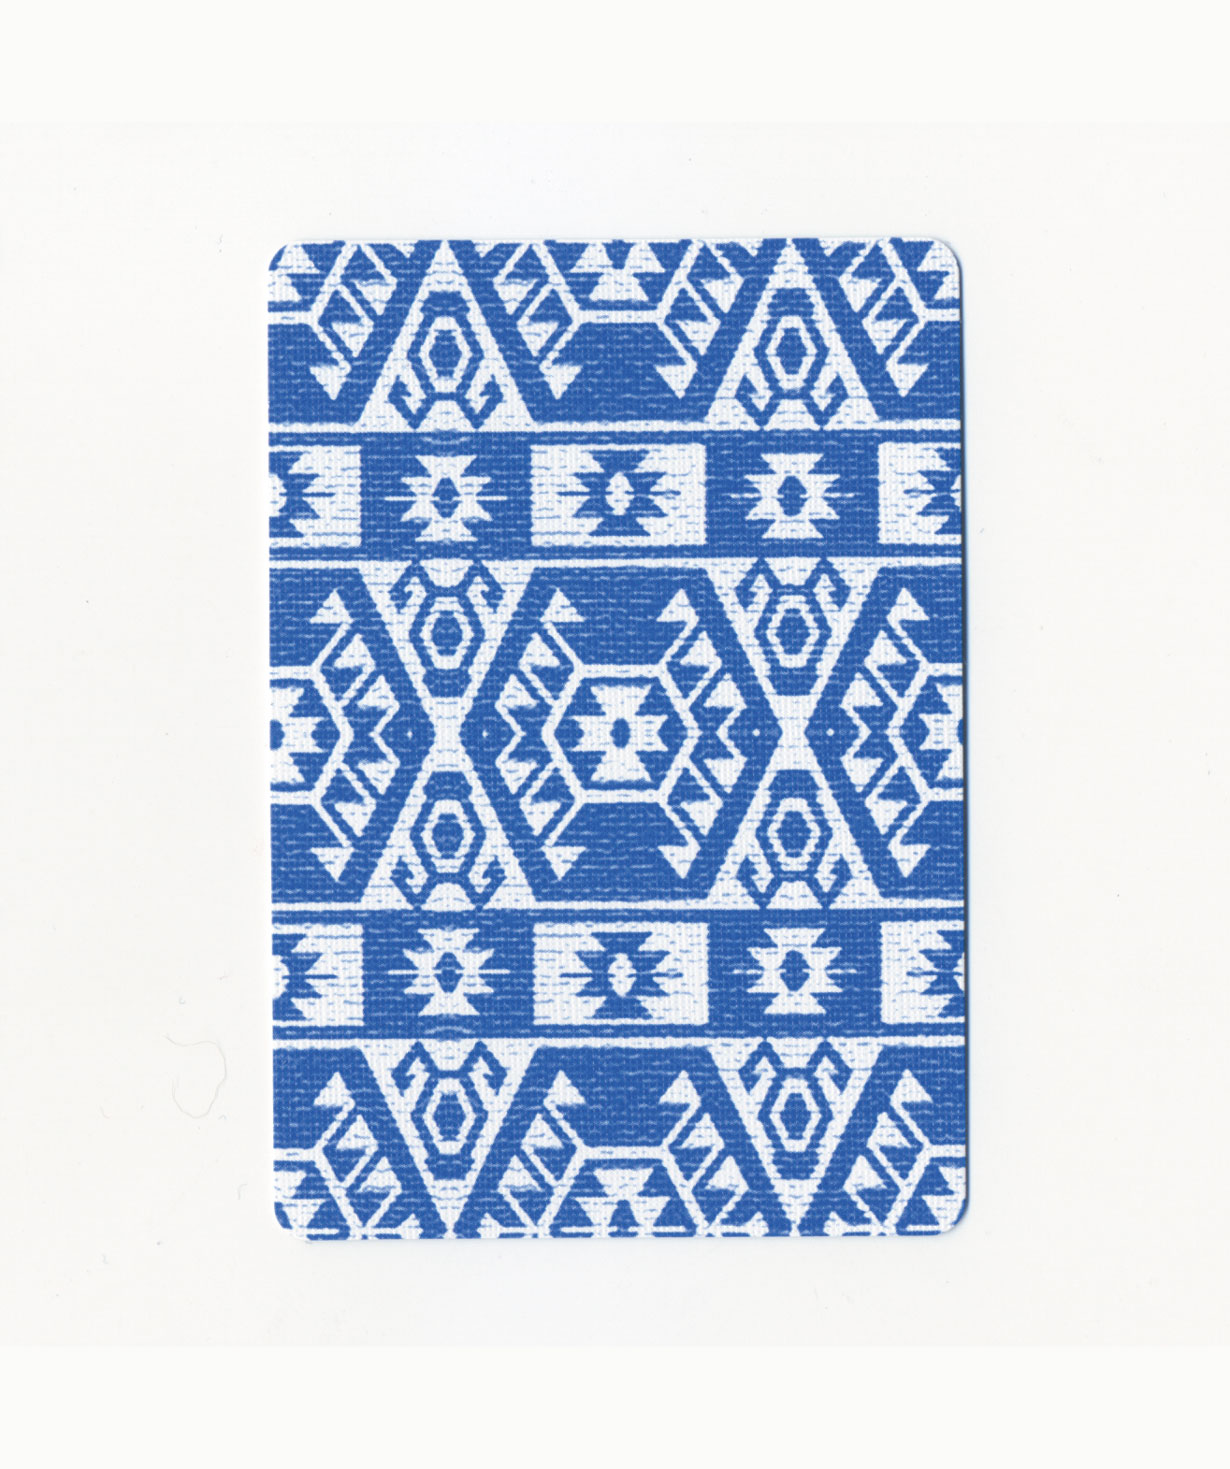 Playing cards ''Armenian Playing Cards'' blue